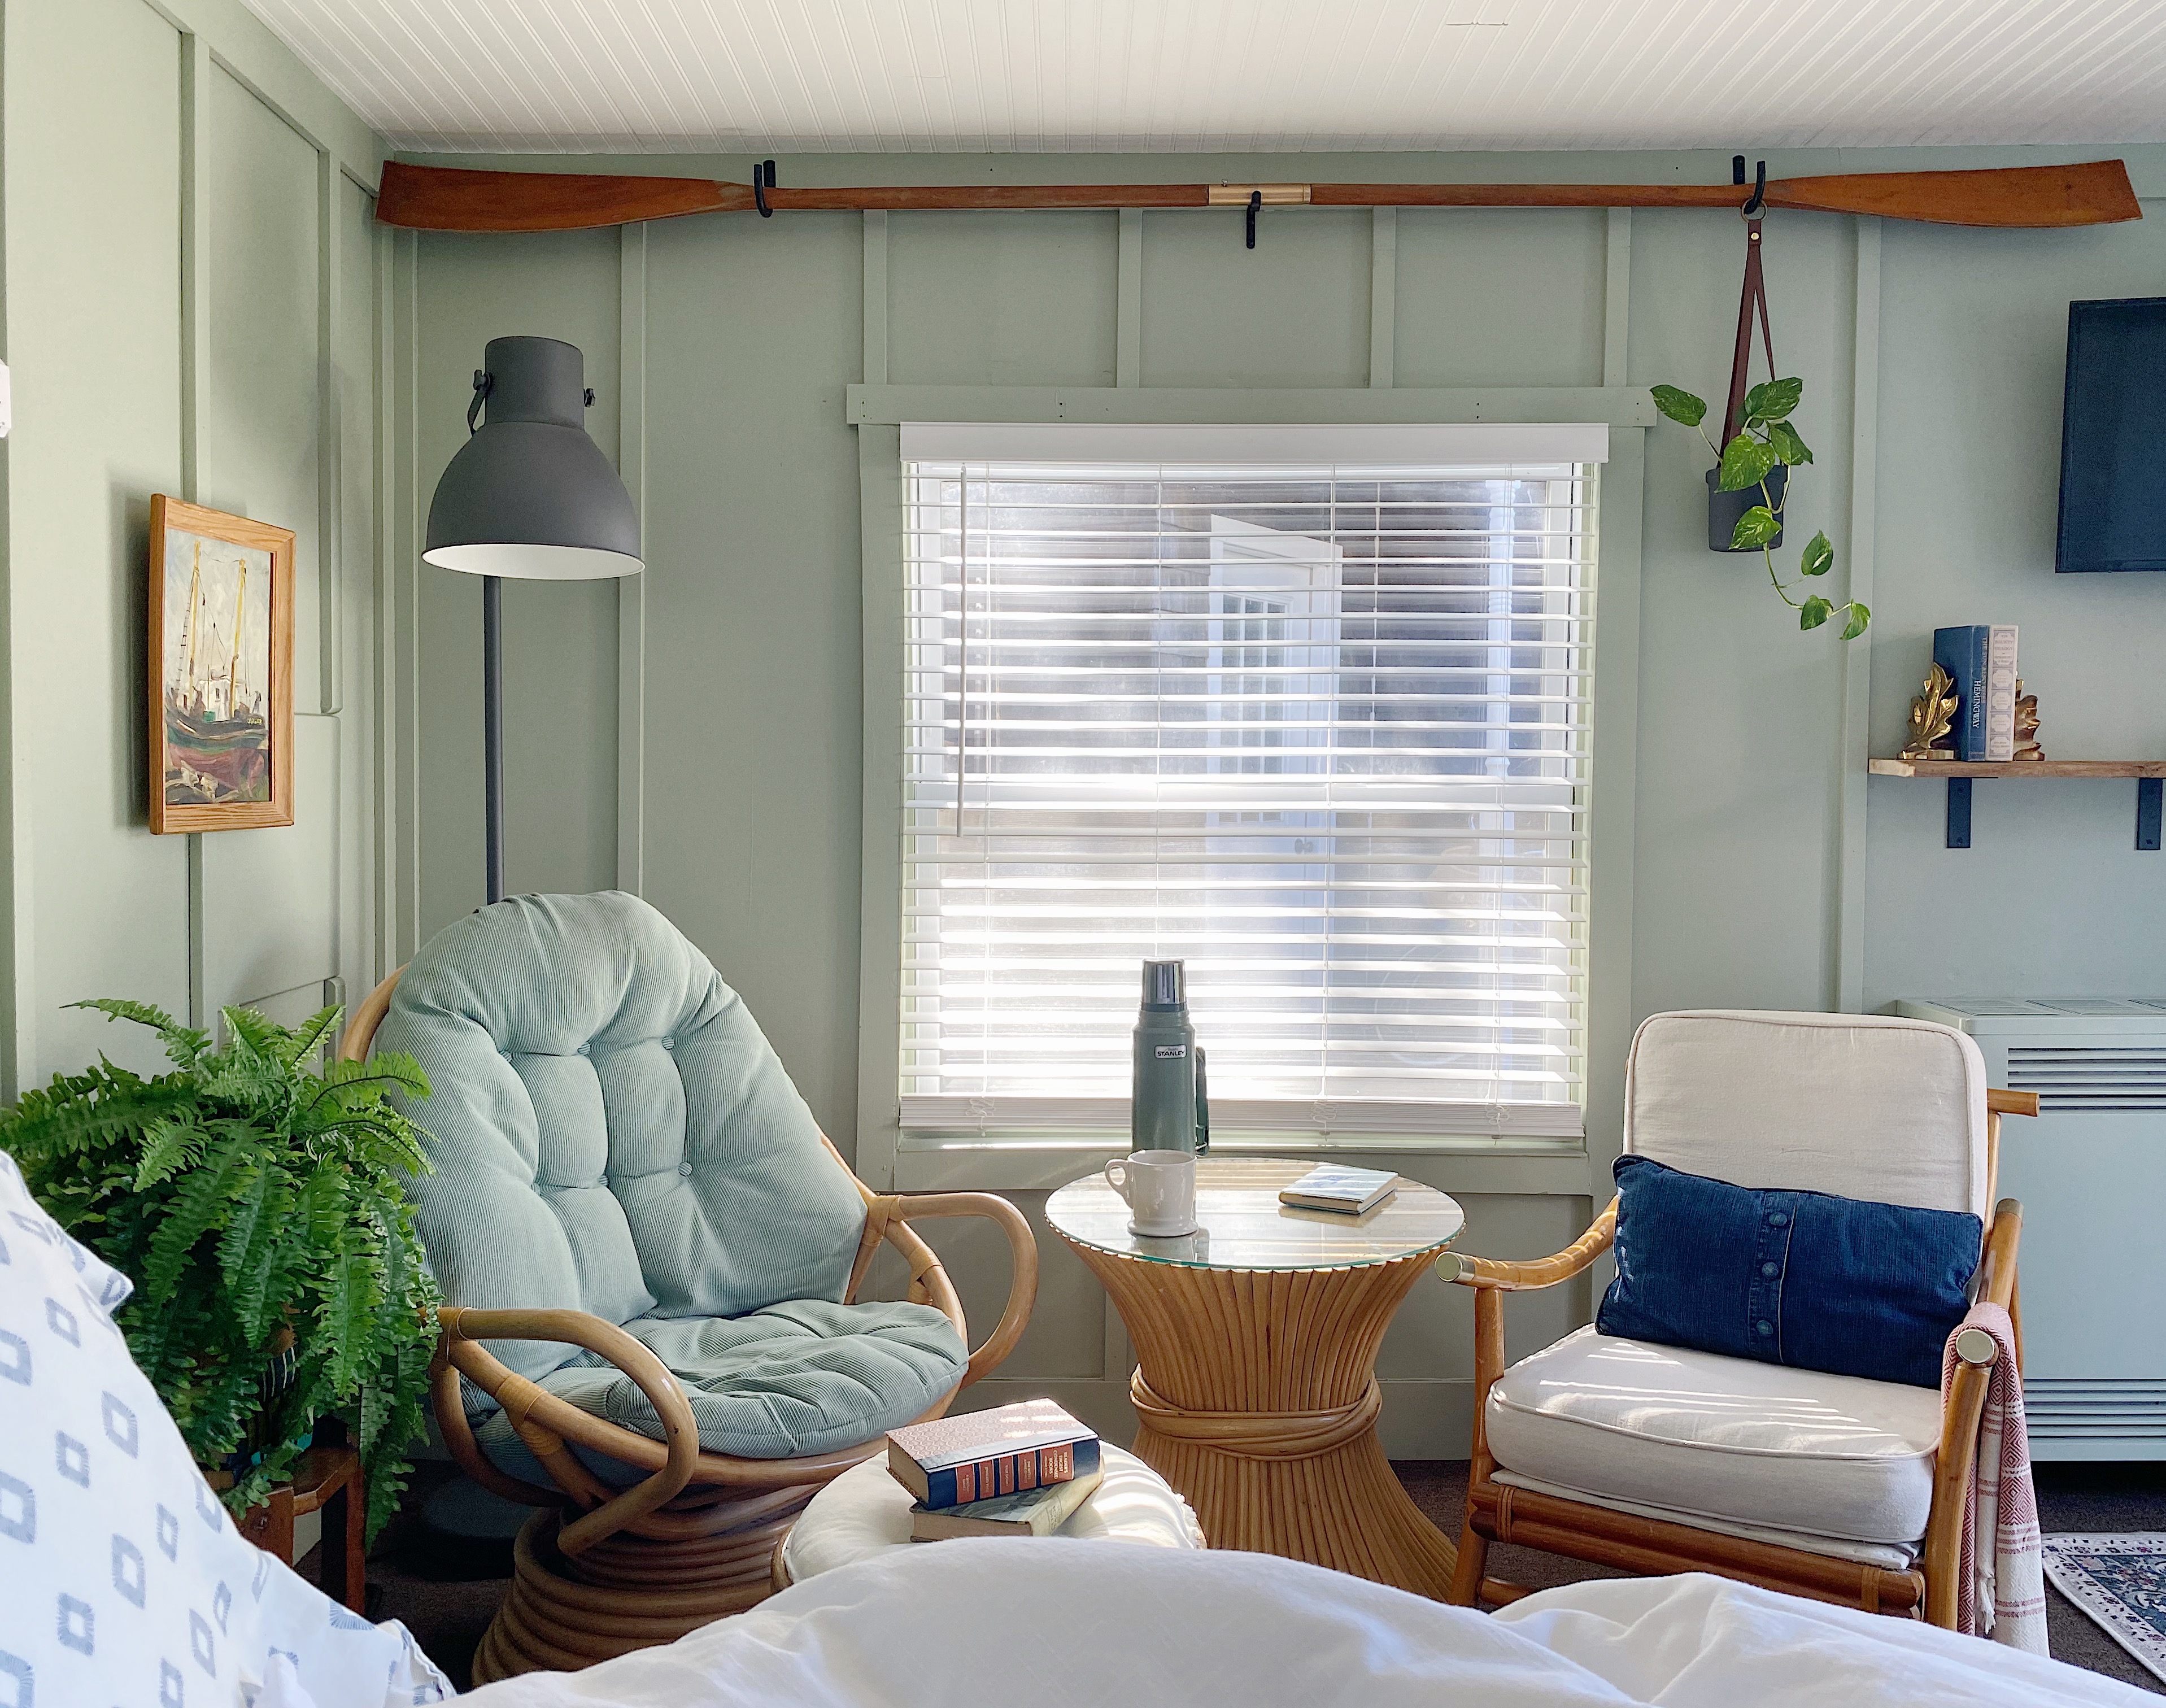 guest cottage sitting area with vintage rattan chairs, Ikea floor lamp, vintage wood oar above a window